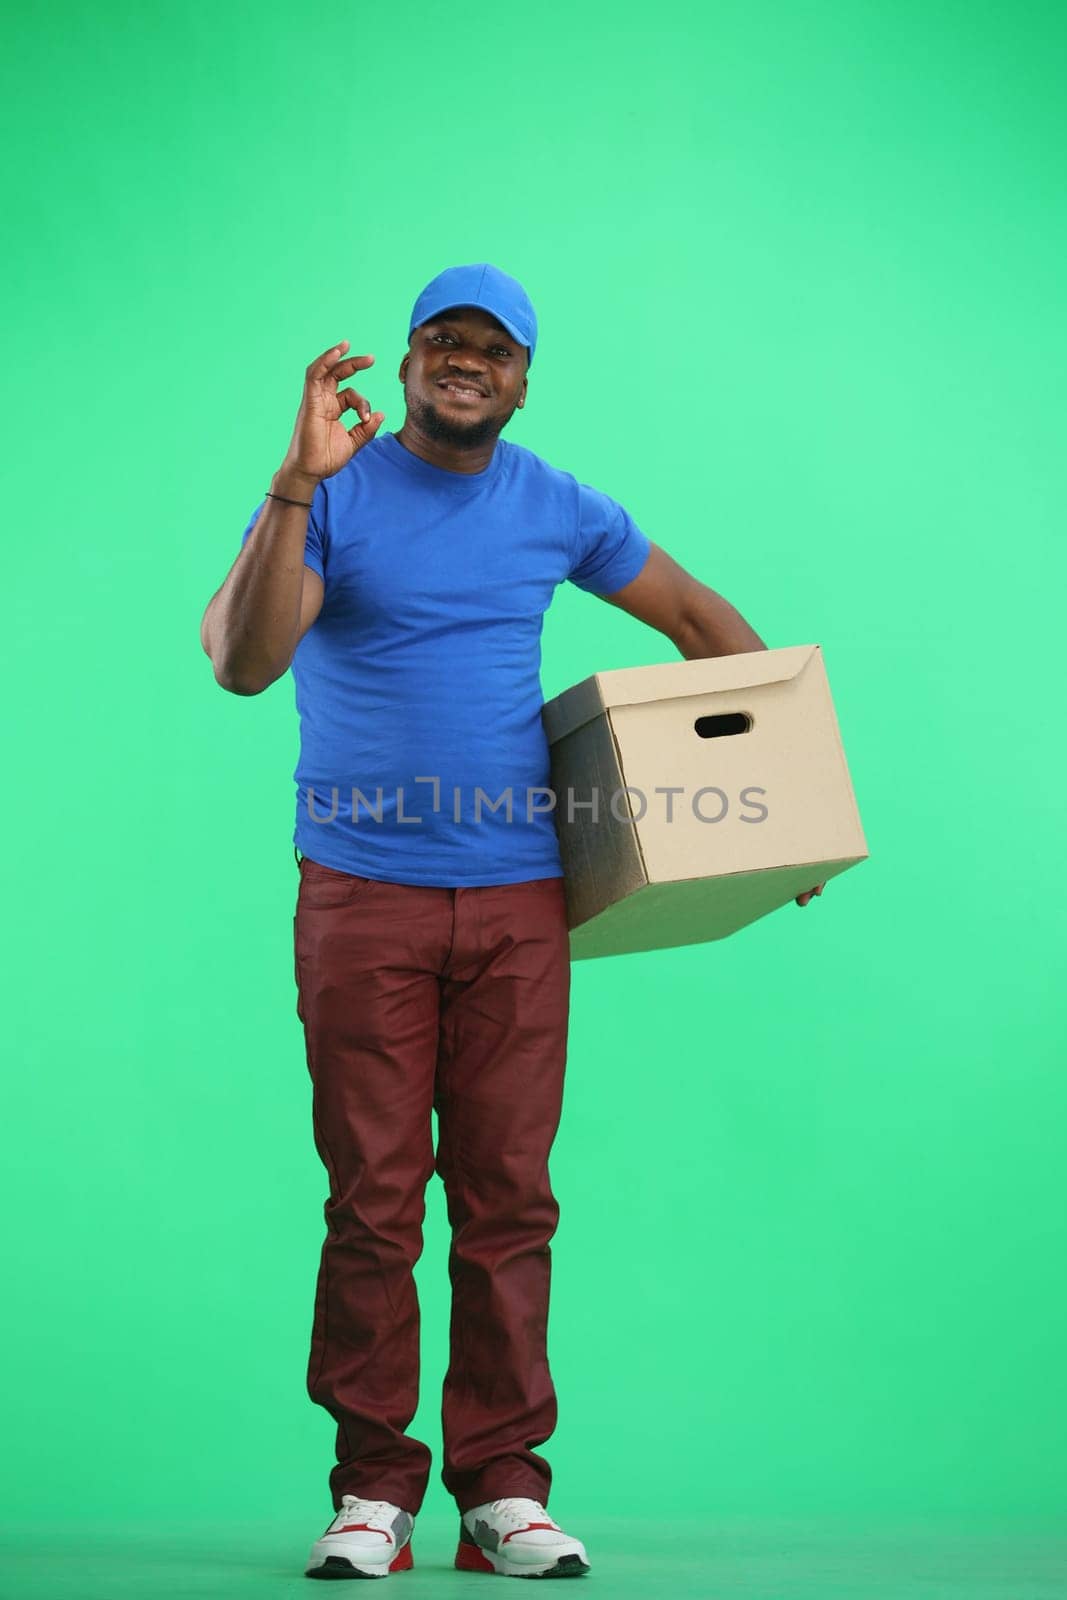 The deliveryman, in full height, on a green background, with a box, shows the ok sign.